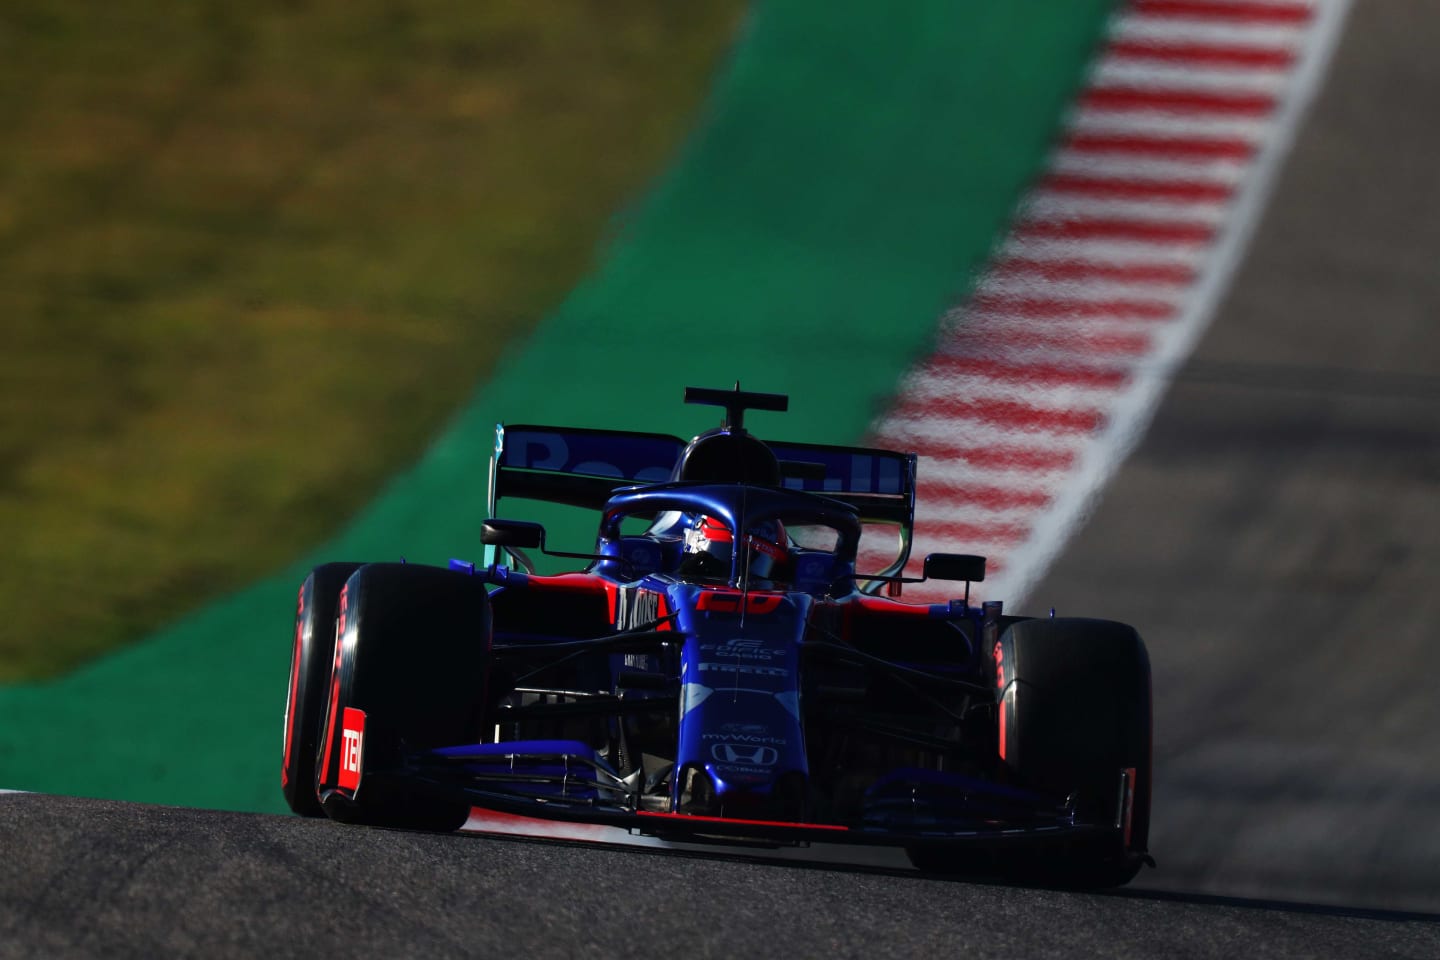 AUSTIN, TEXAS - NOVEMBER 02: Daniil Kvyat driving the (26) Scuderia Toro Rosso STR14 Honda on track during qualifying for the F1 Grand Prix of USA at Circuit of The Americas on November 02, 2019 in Austin, Texas. (Photo by Dan Istitene/Getty Images)